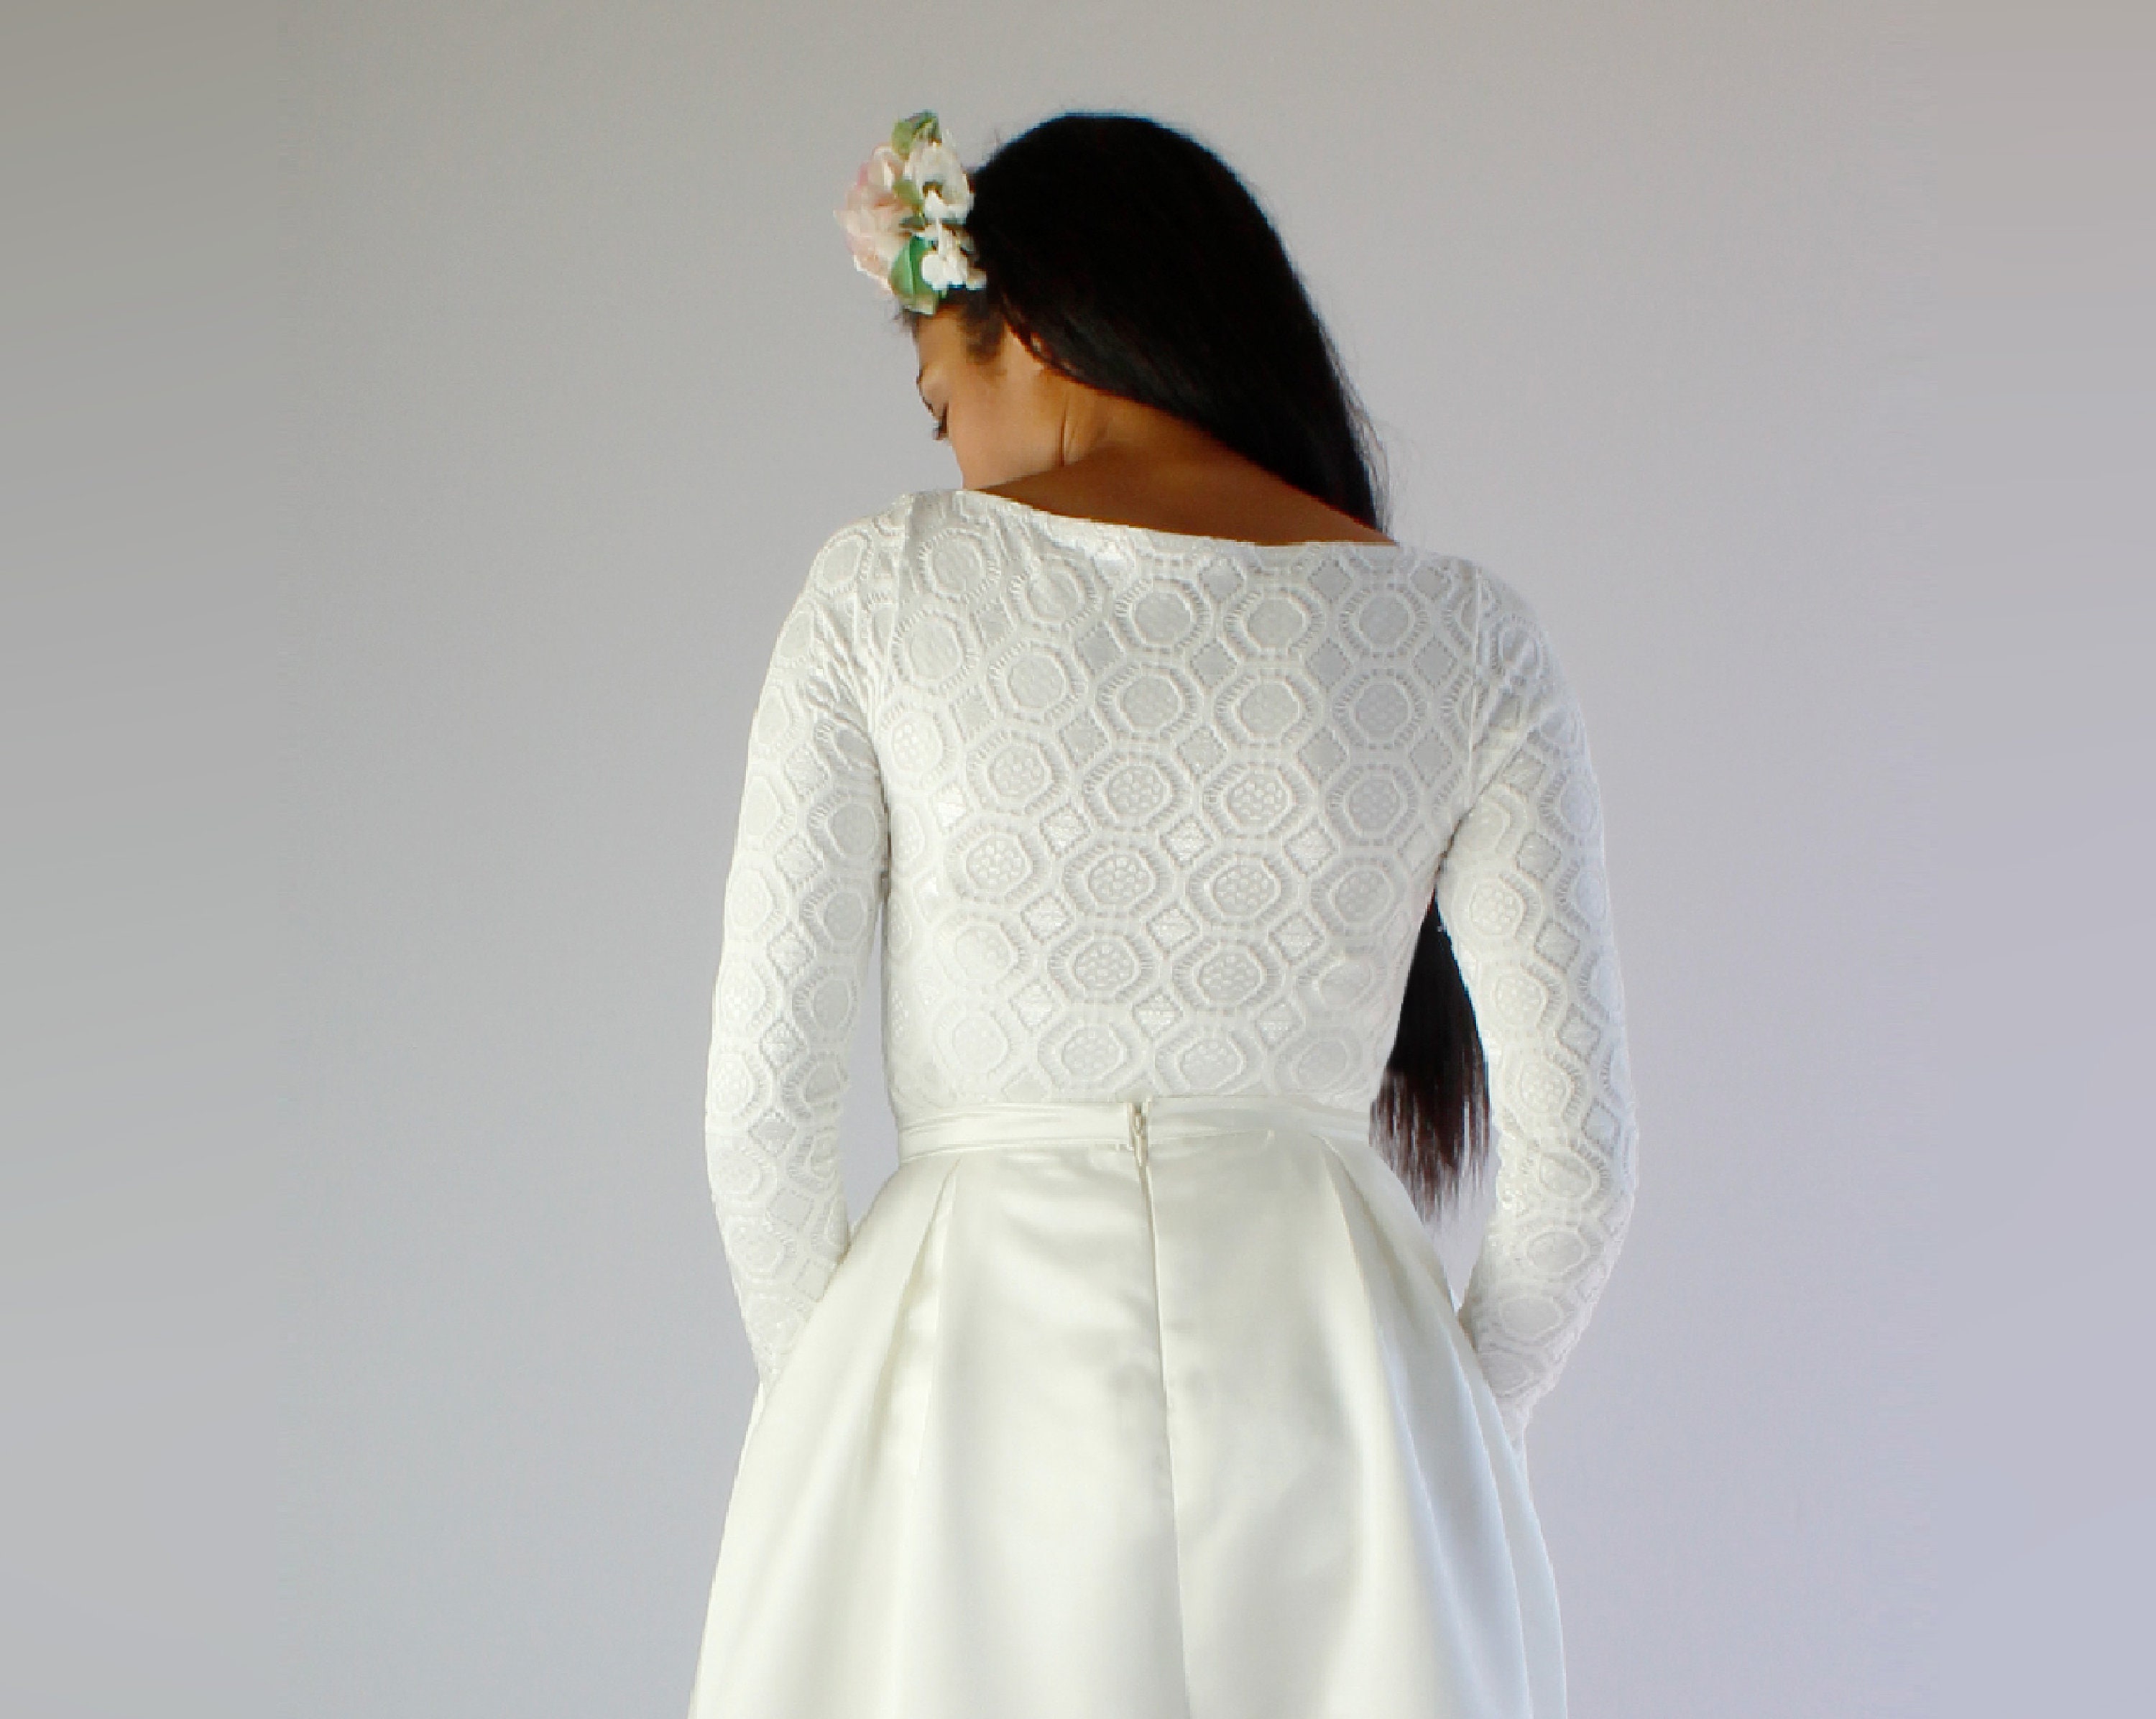 Simple two pieces wedding dress composed by a lace bridal bodysuit